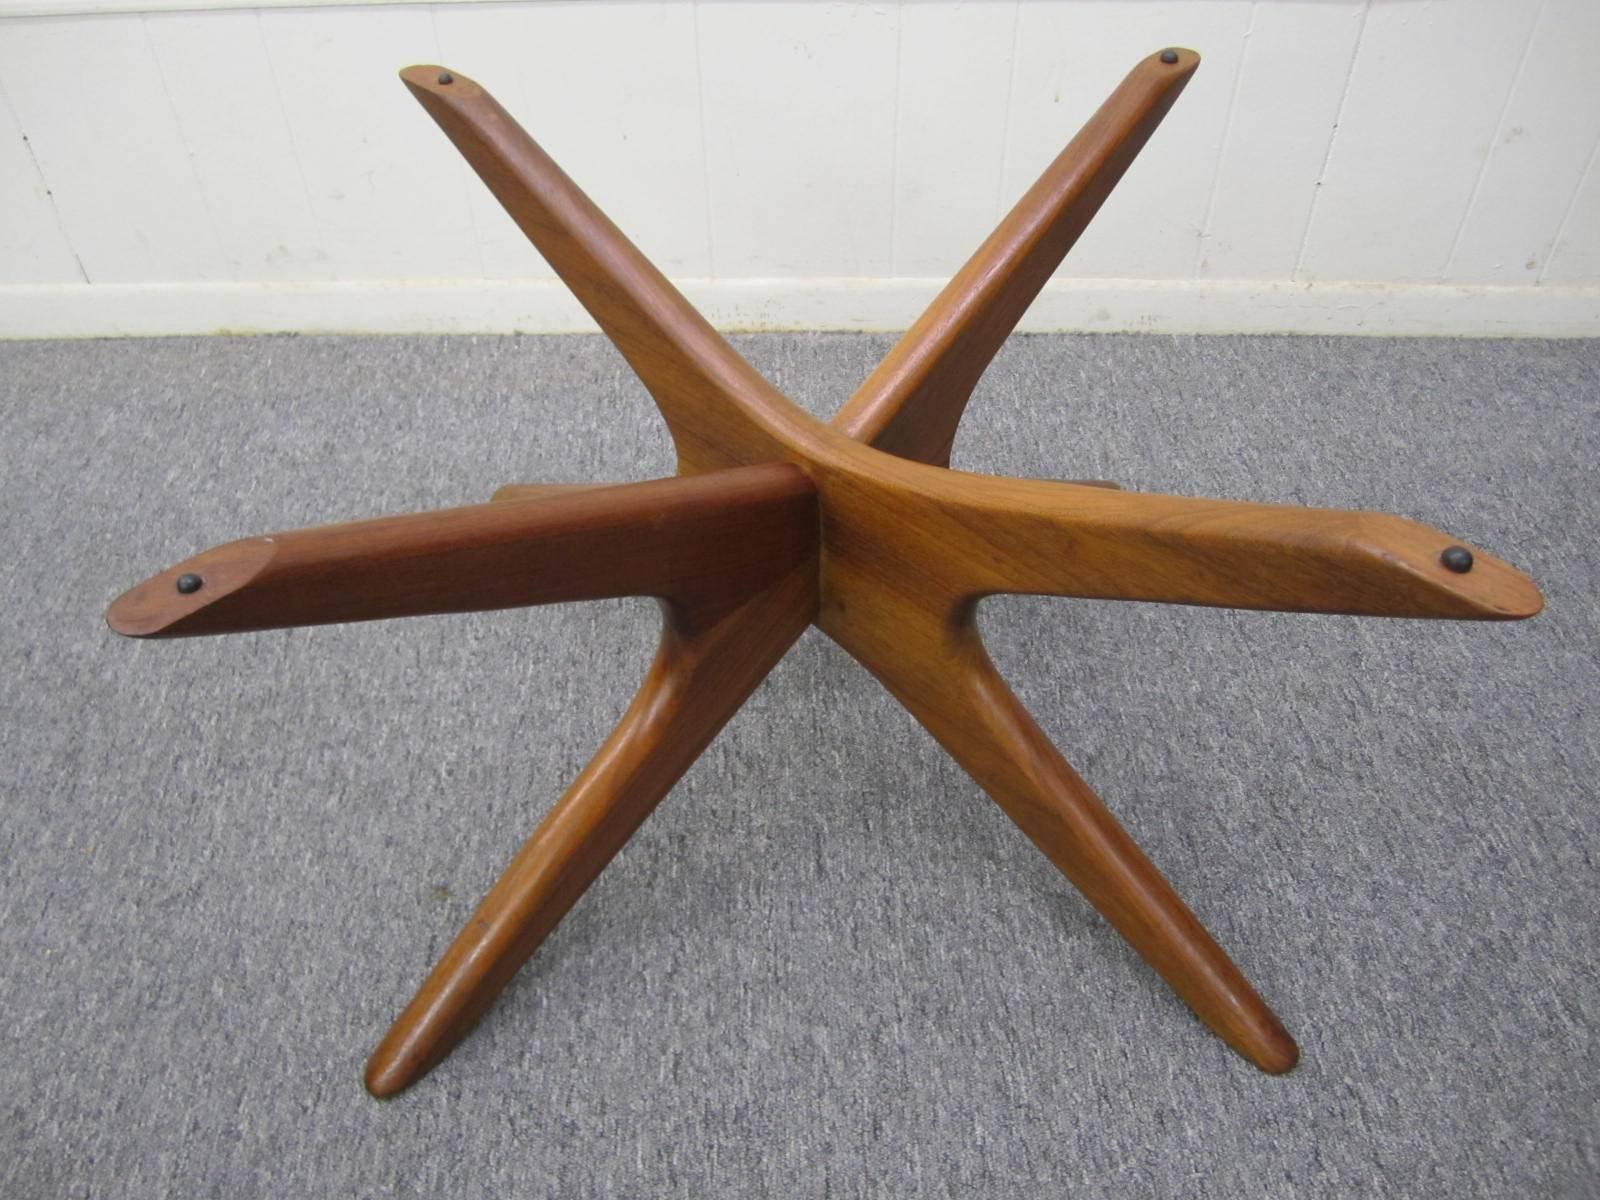 Gorgeous Adrian Pearsall solid walnut sculptural jax coffee table. This circular form is rather rare with most forms being oval or kidney shaped.